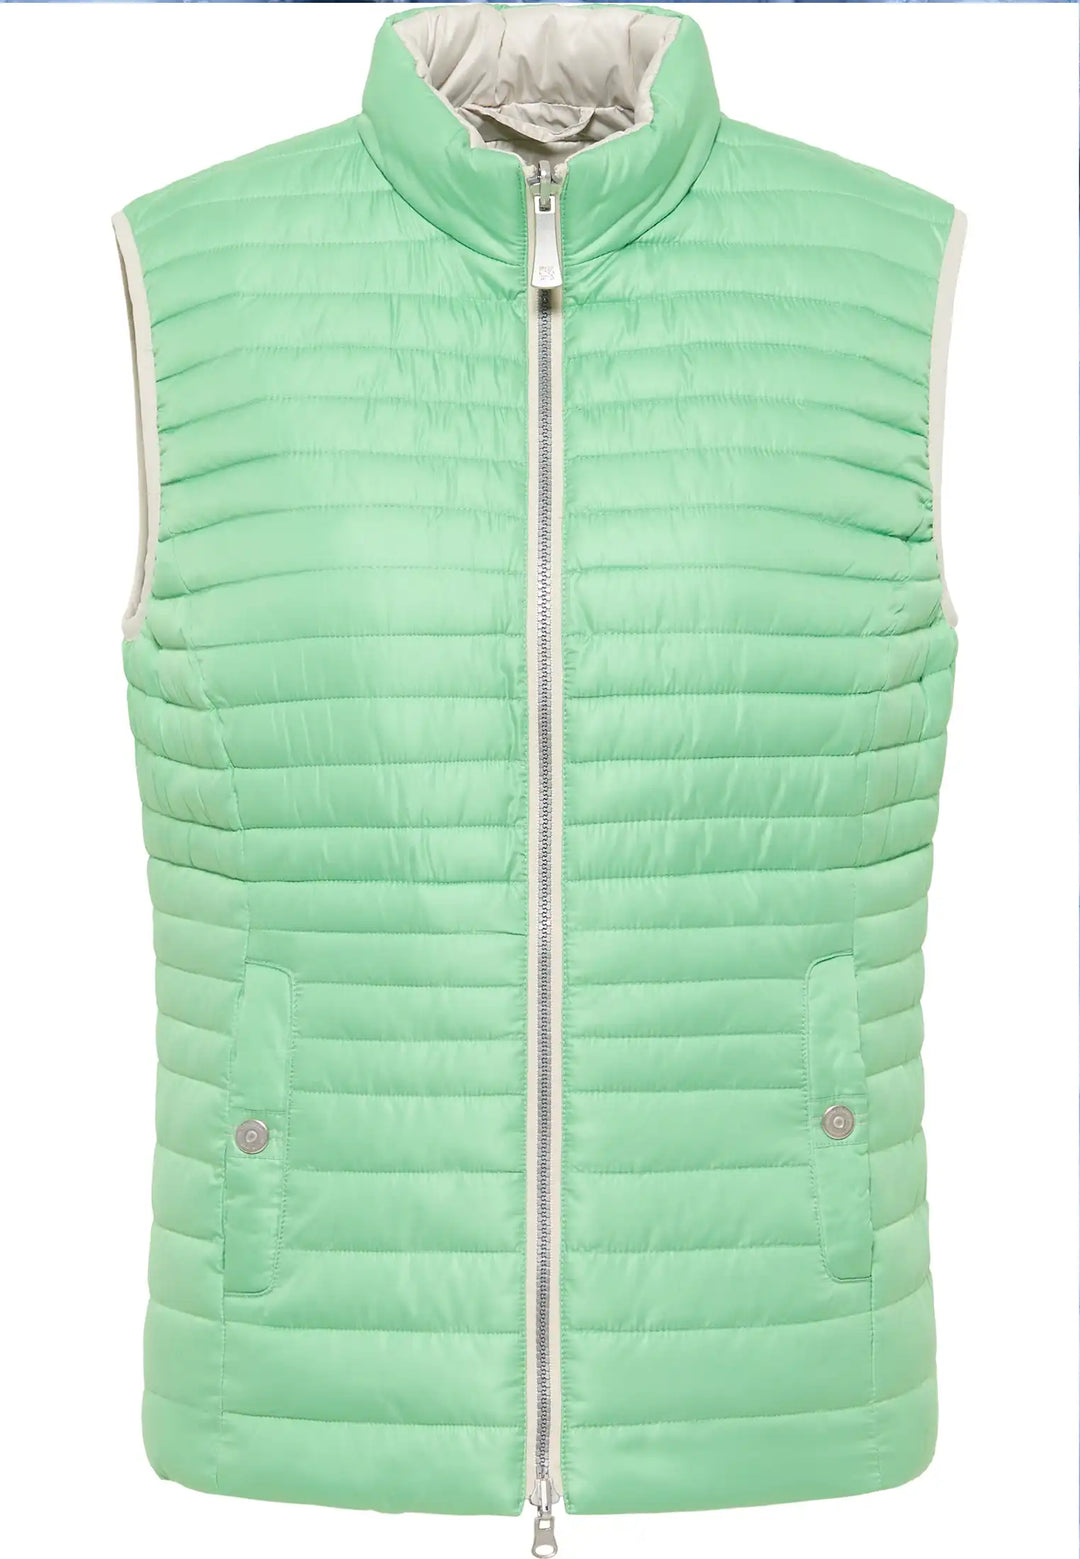 Reversible gilet featuring a green side for a splash of colour and a light beige side for a classic look, both with functional pockets, quilted warmth, and a high-neck collar.